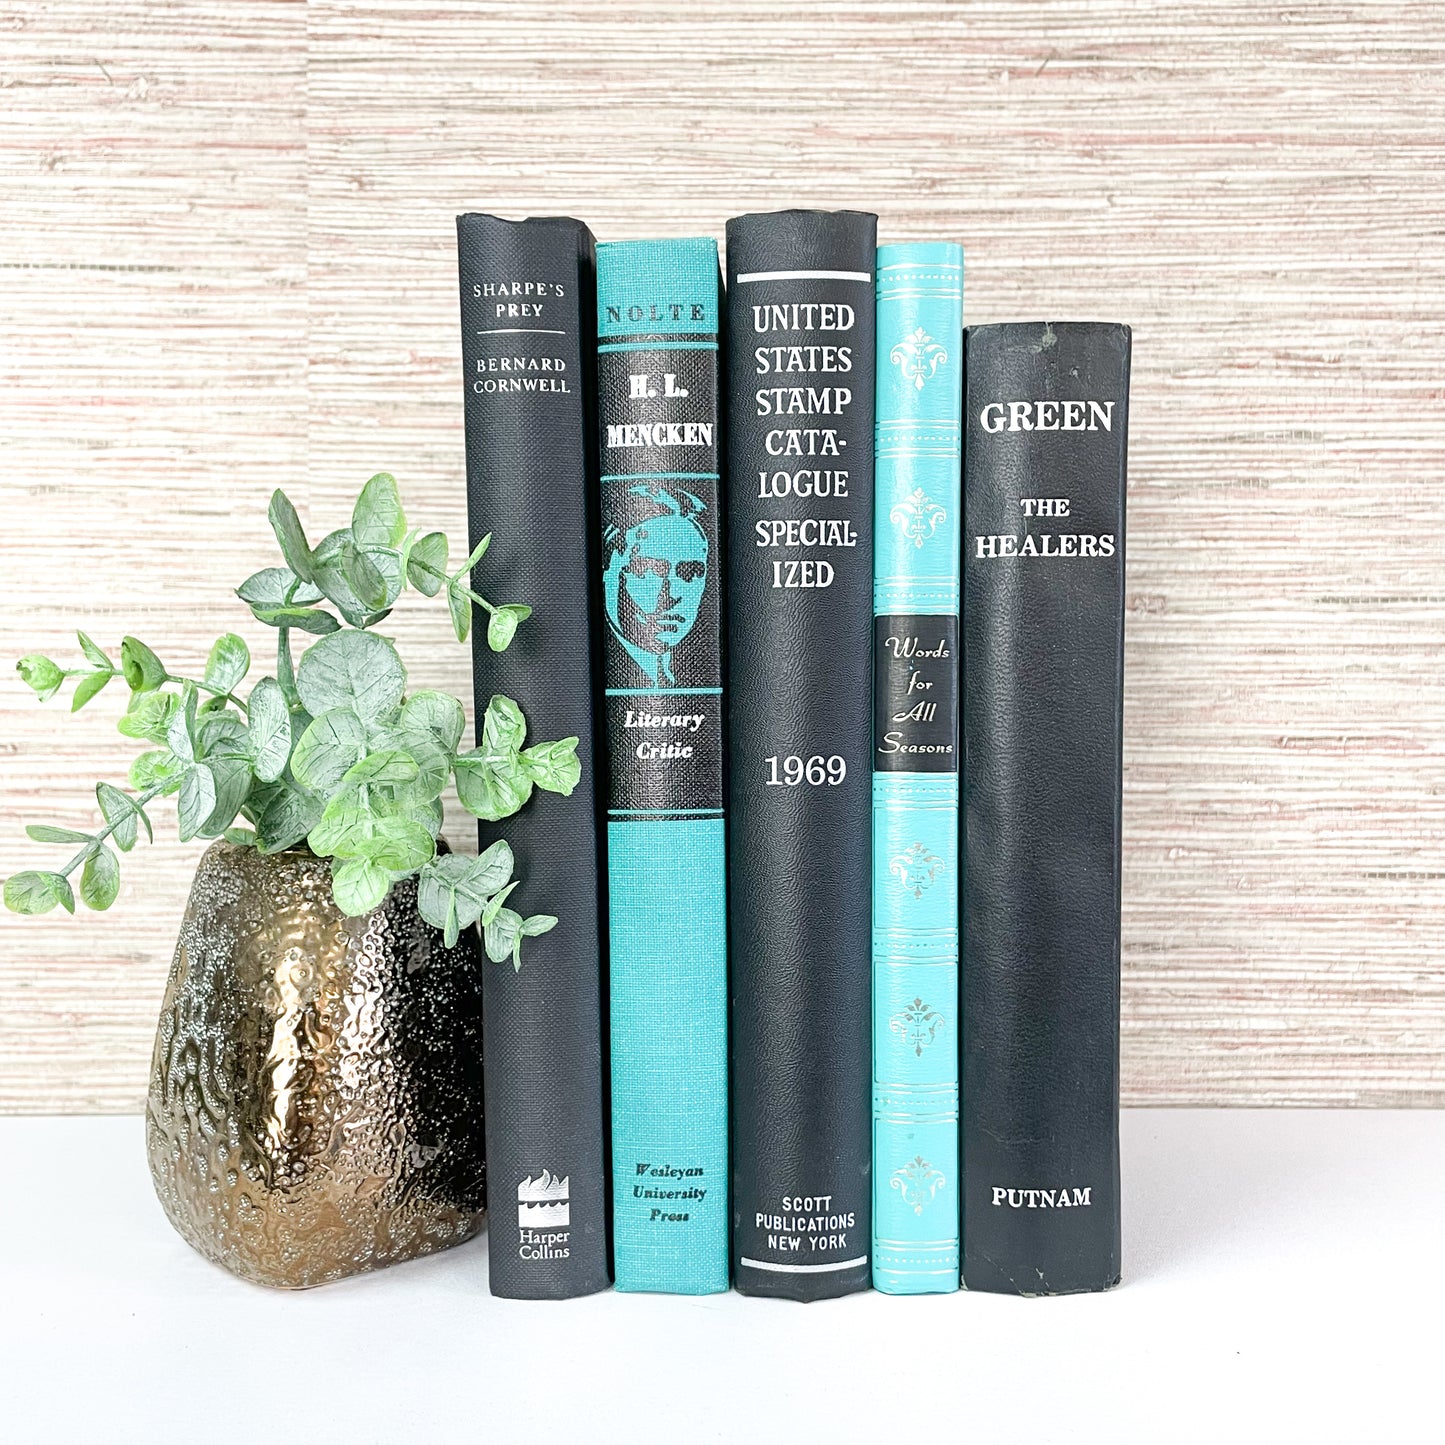 Green and Black Books for Mantel Decor